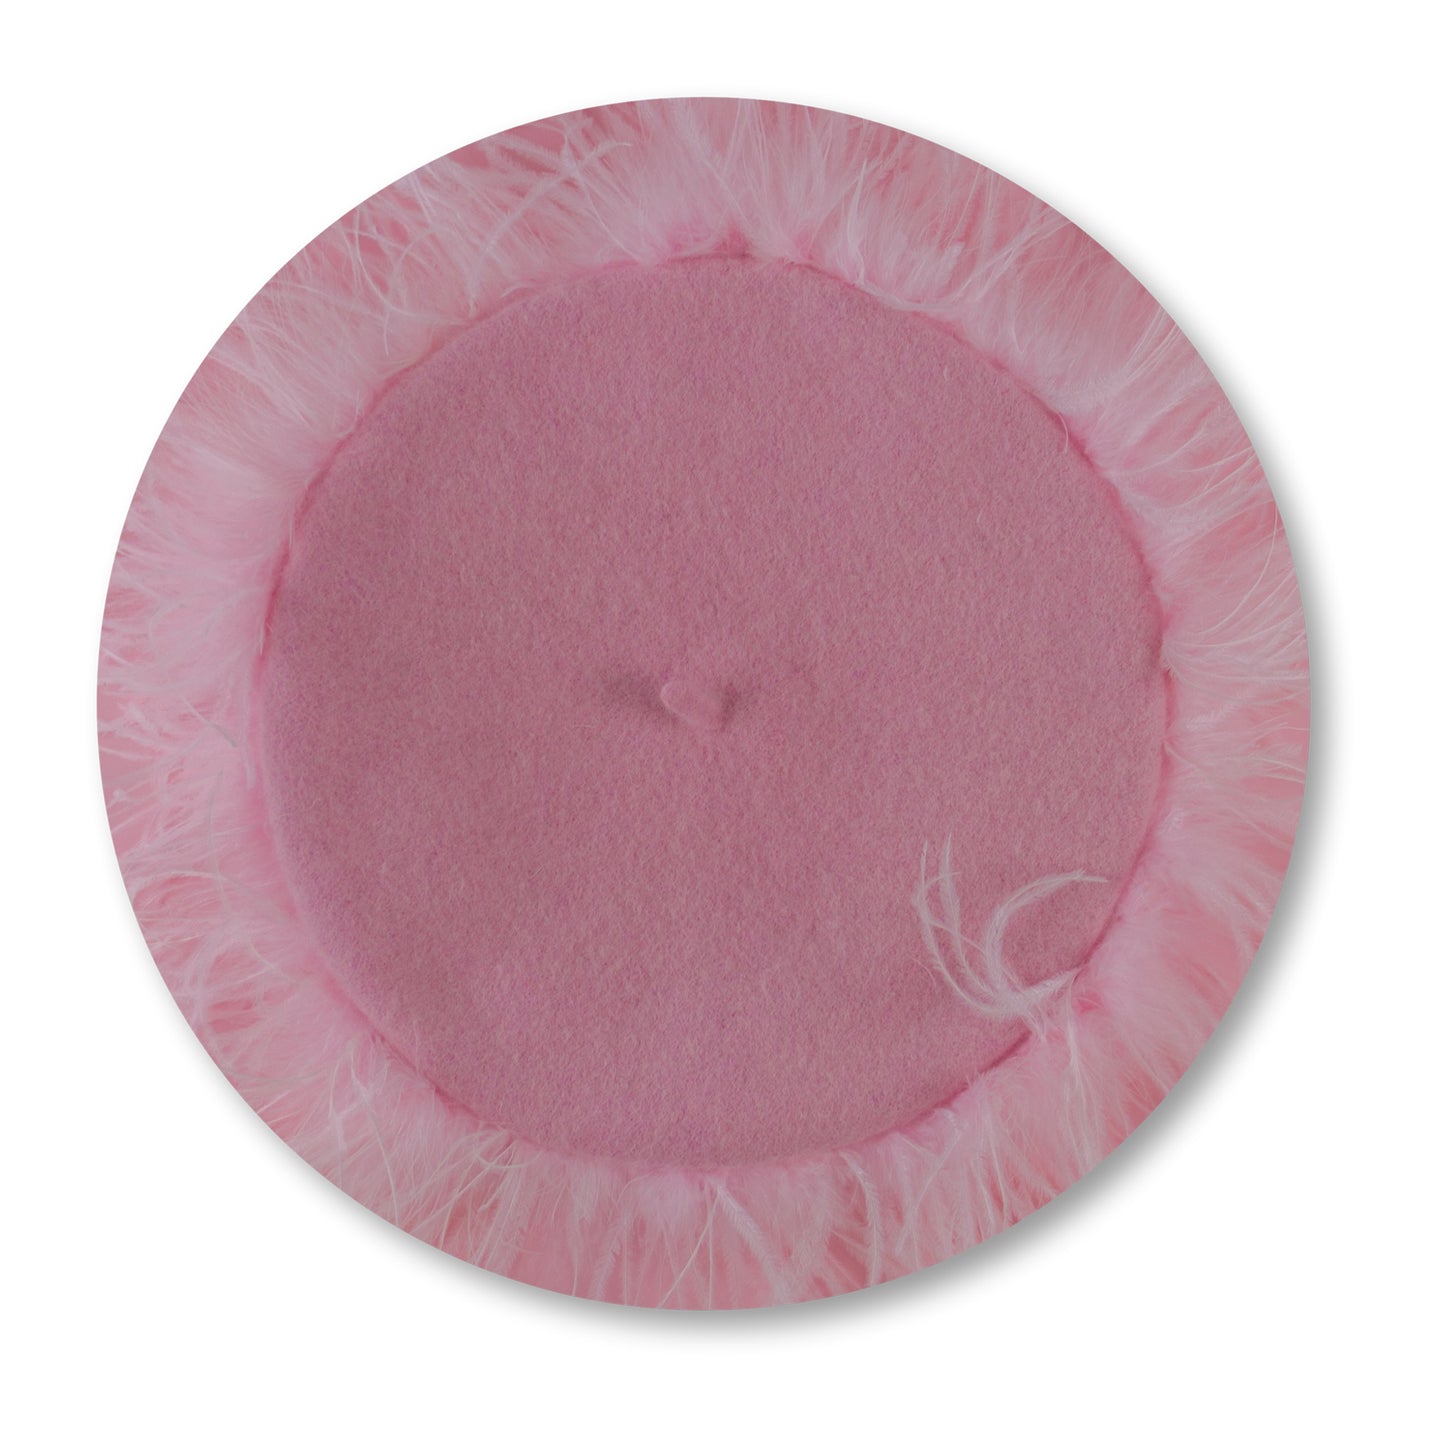 Feather Boa Beret in Pink